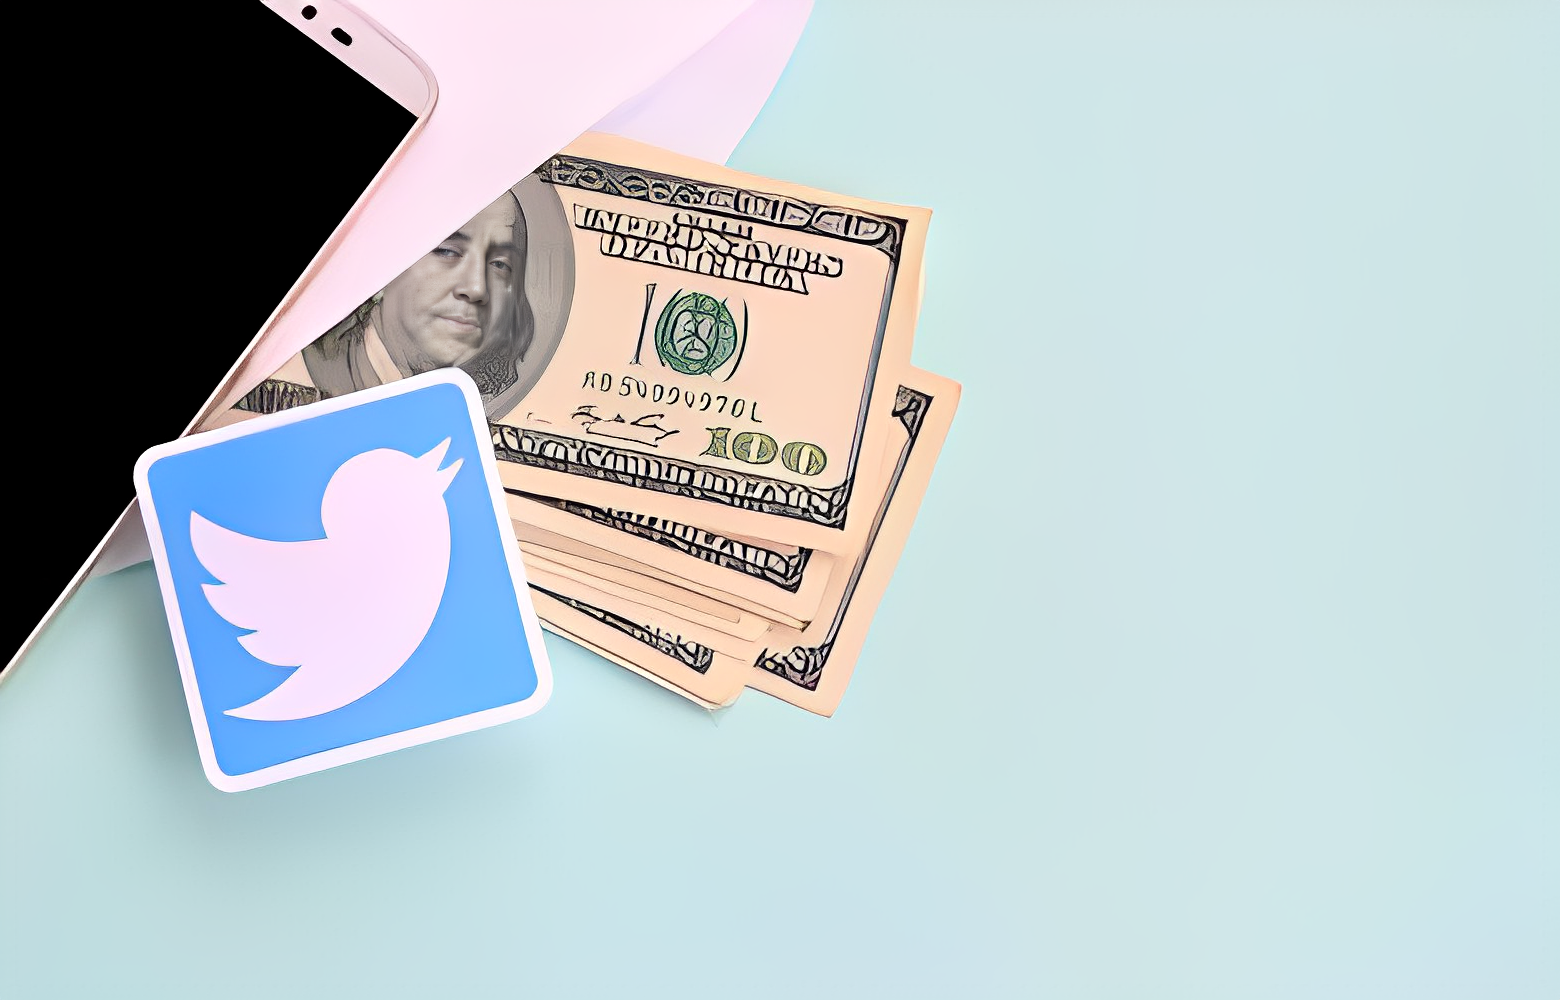 How to make money on Twitter